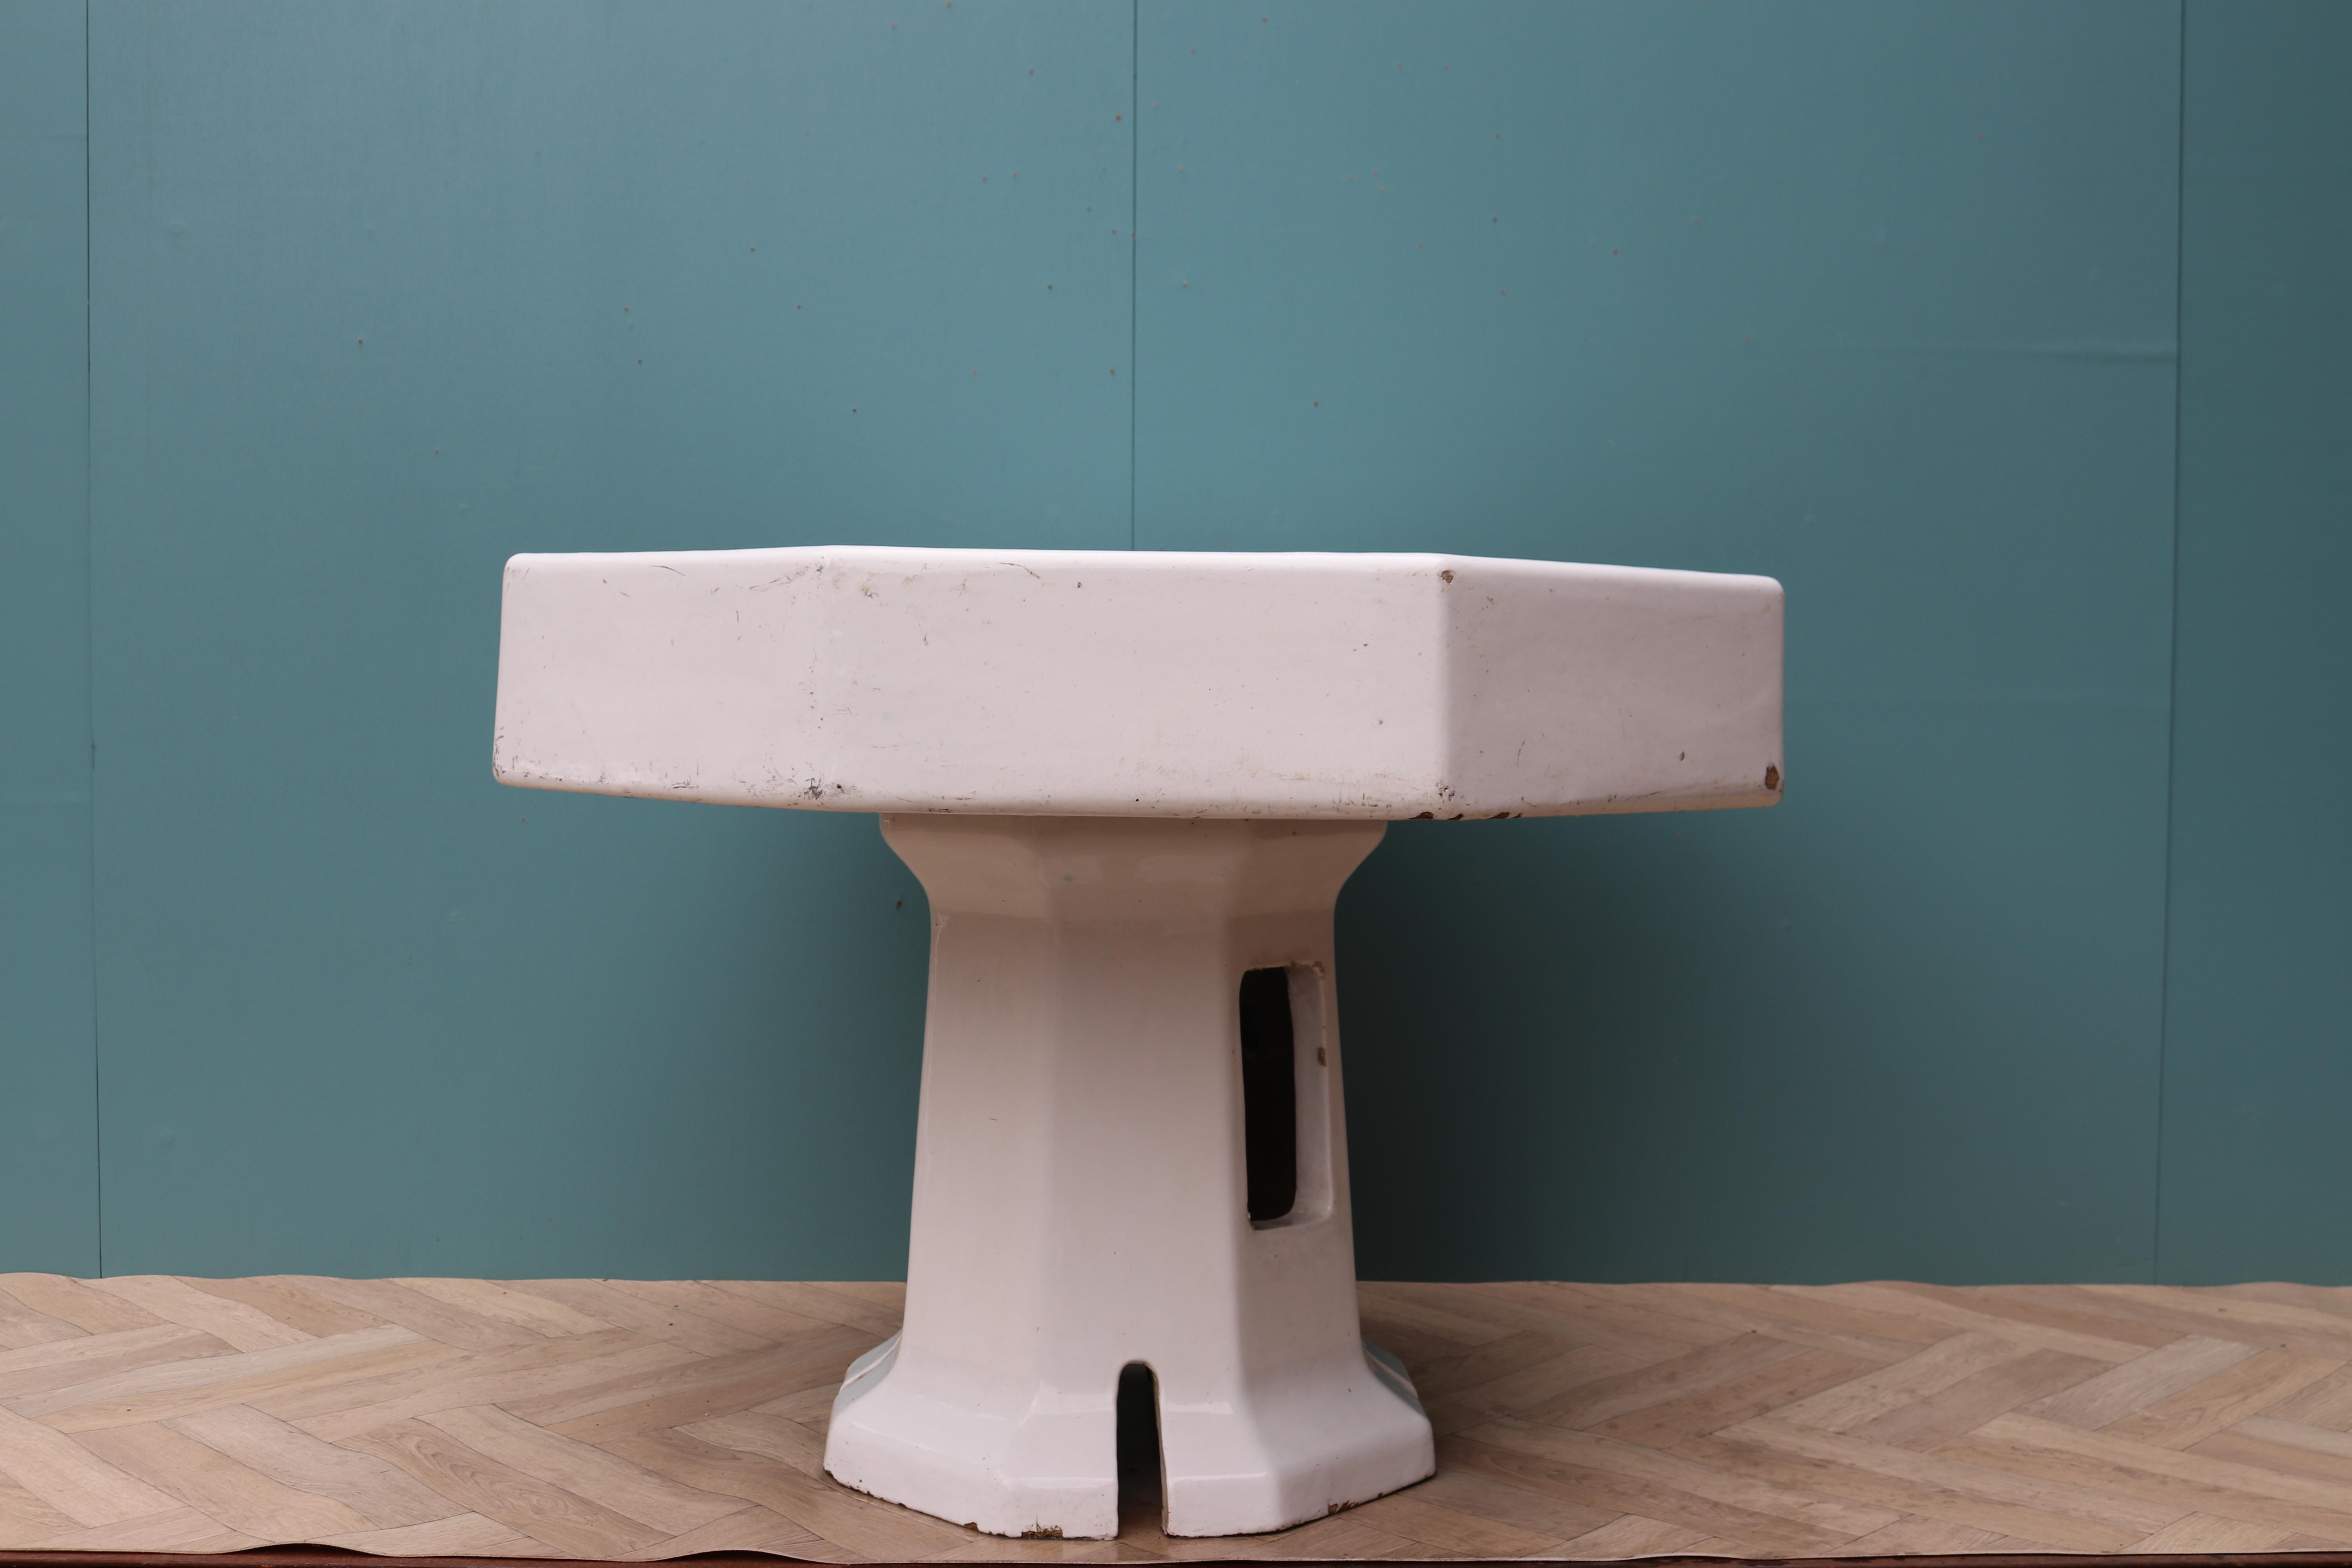 A white glazed ceramic bowl on pedestal. Originally a wash basin, this durable piece can be repurposed as a garden fountain.
 
Additional Dimensions
 
Depth of bowl 12 cm
 
Base 56 cm square
 
Waste Diameter 10 cm